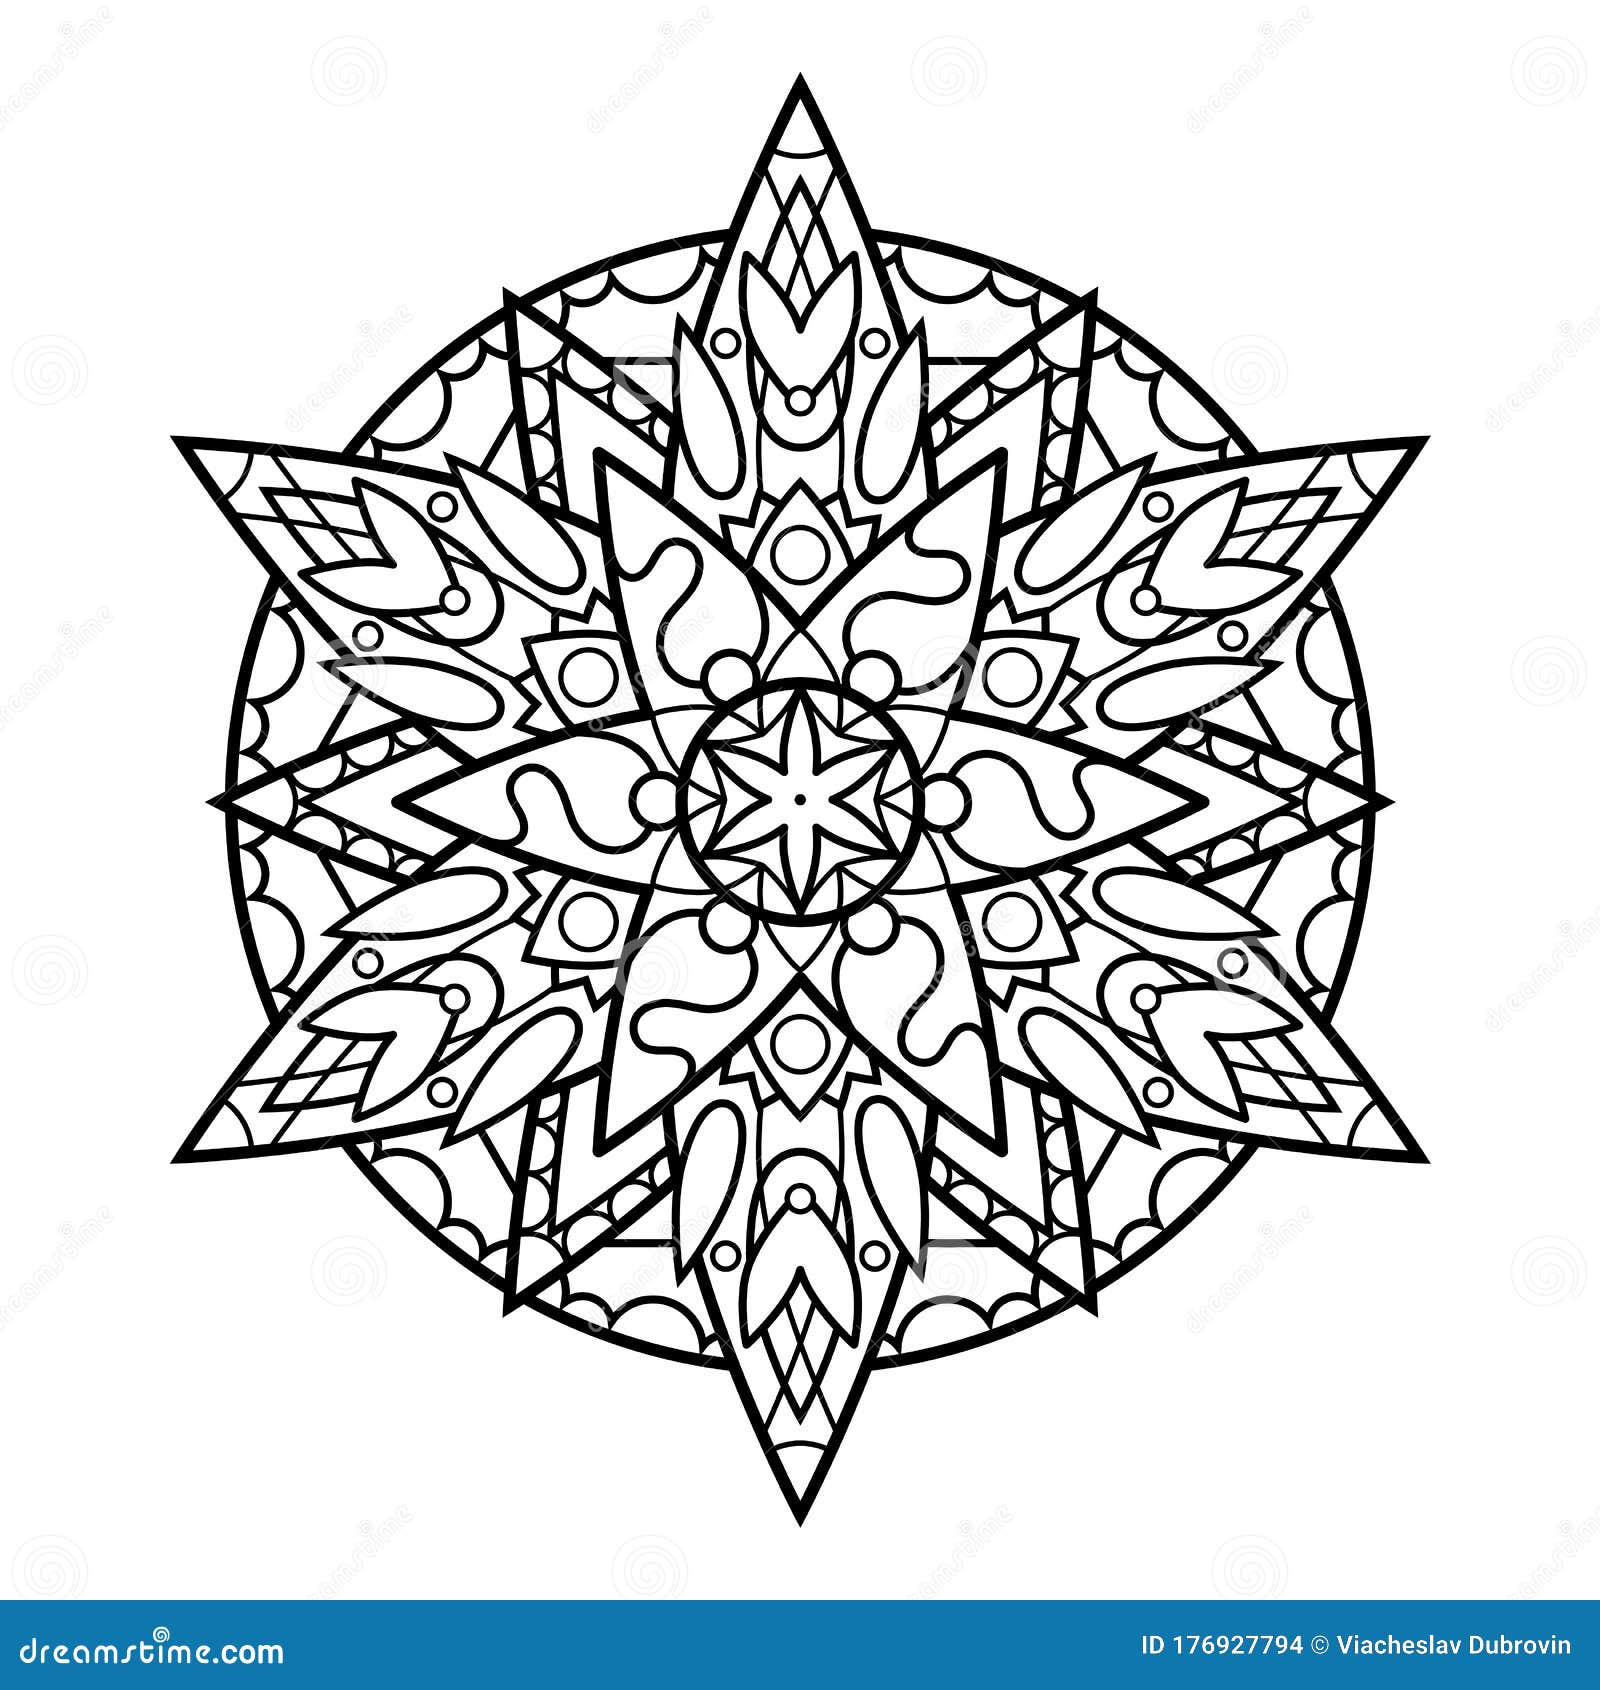 Download Black And White Vector Mandala On White Background. Antistress Coloring Page. Oriental Mandala ...